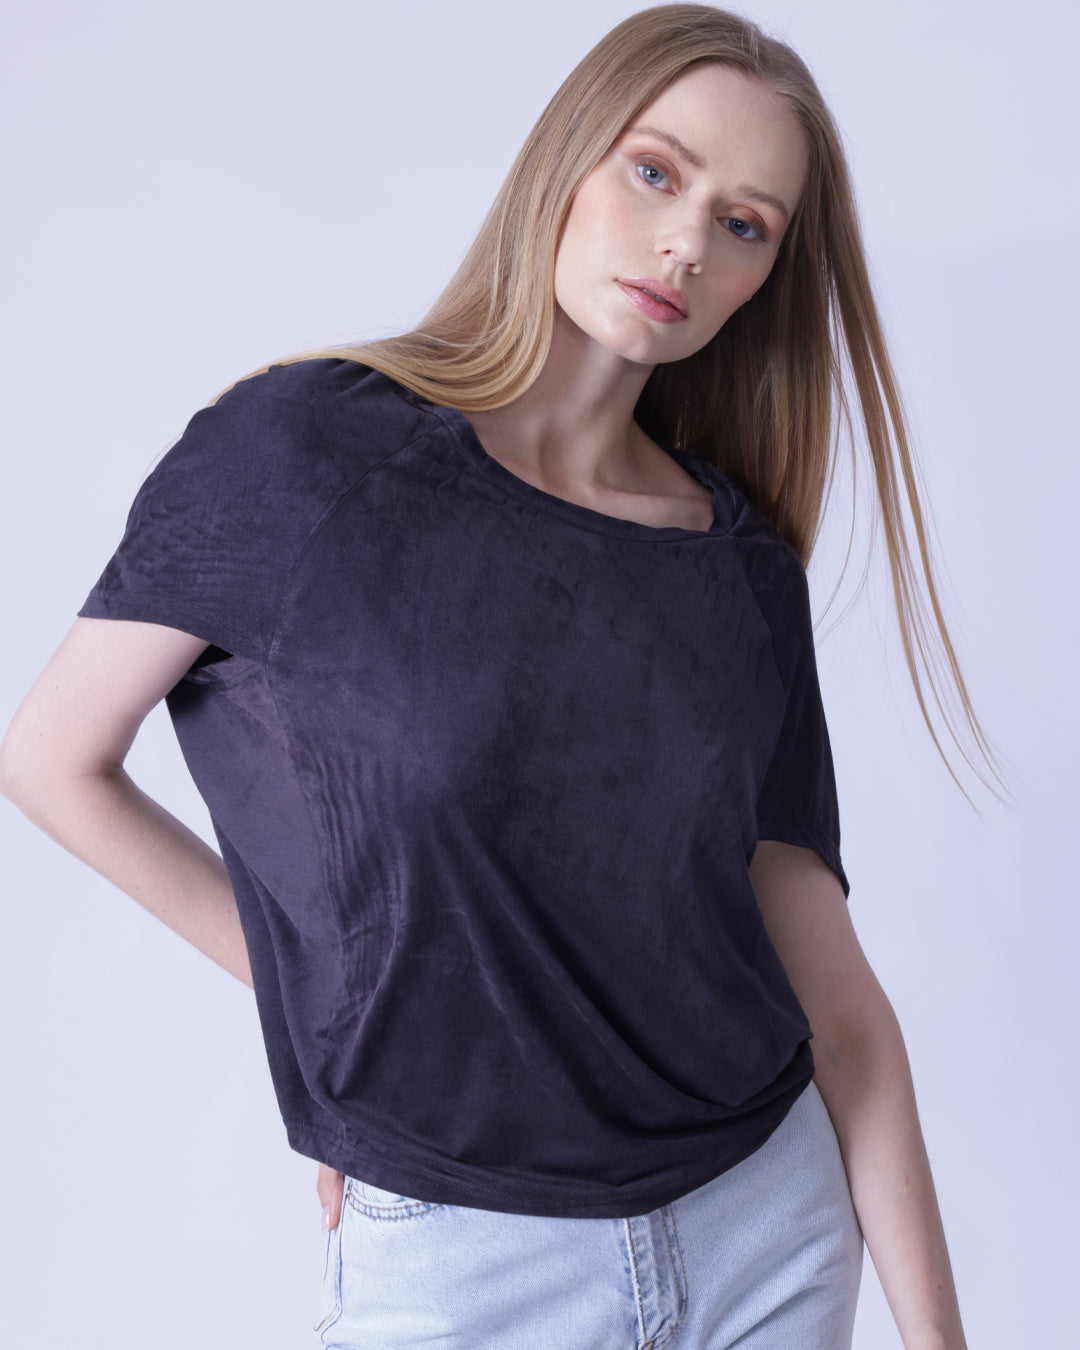 Suede-like Super Soft and Elegant Batwing Sleeve T-Shirt